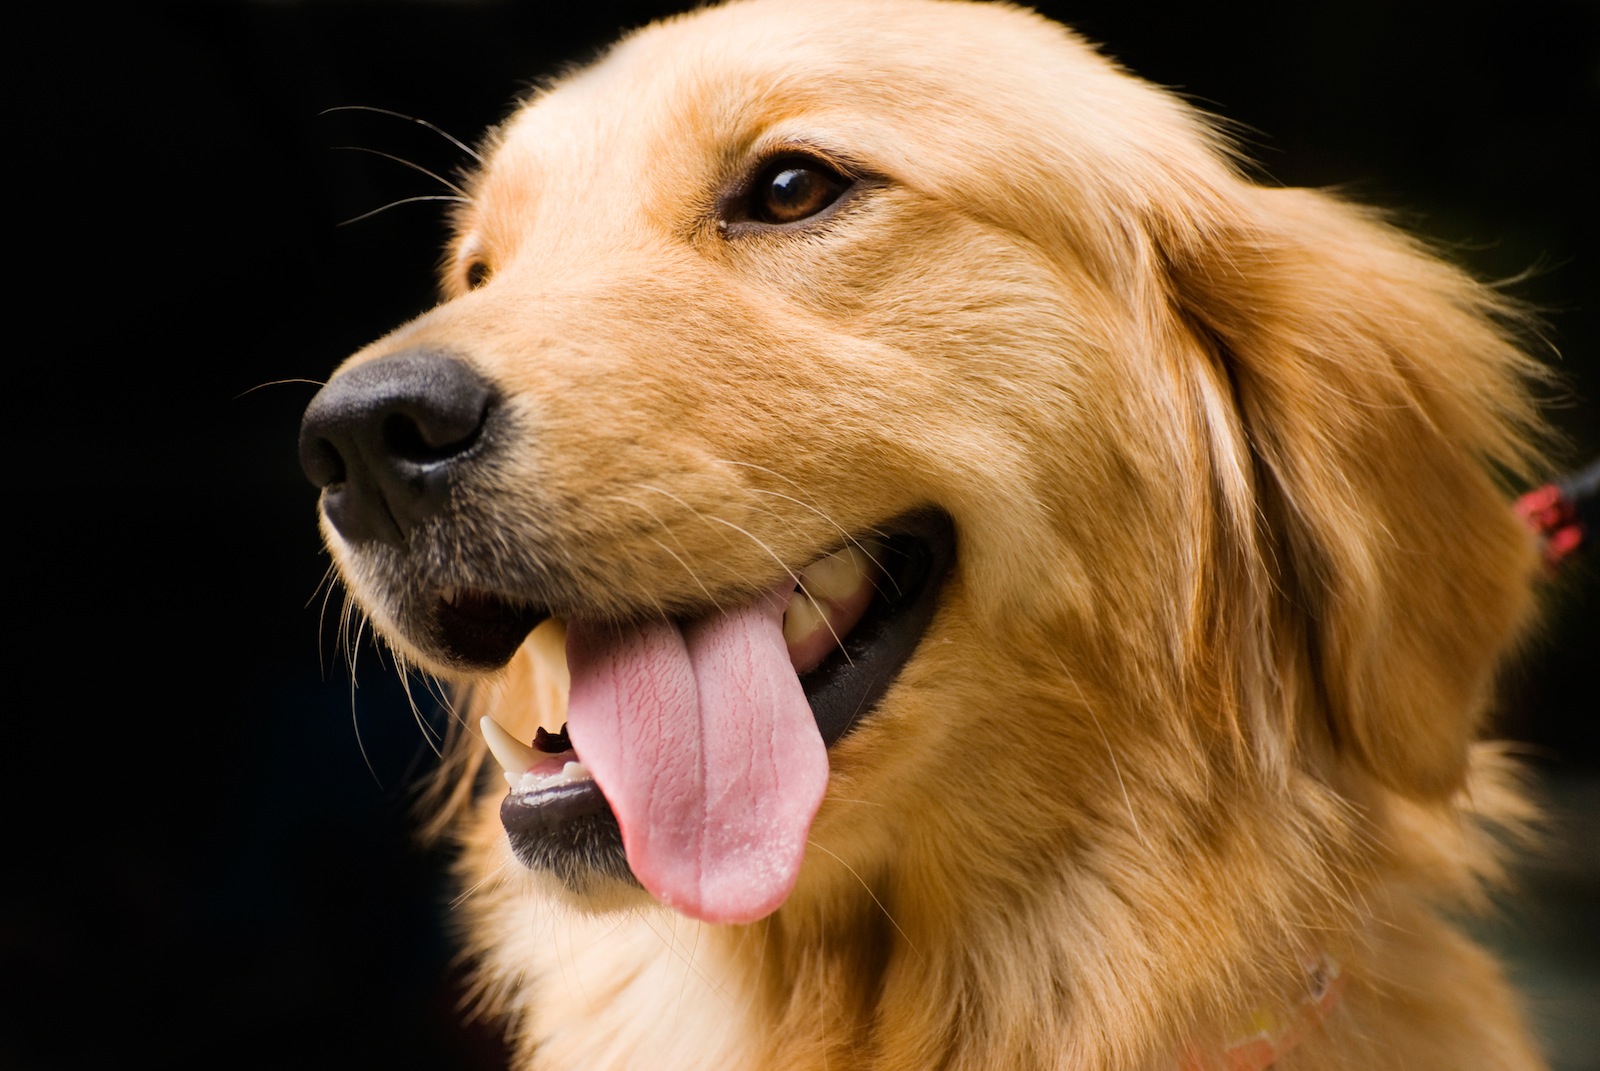 research-team-seeks-golden-retriever-owners-for-study-the-brock-news